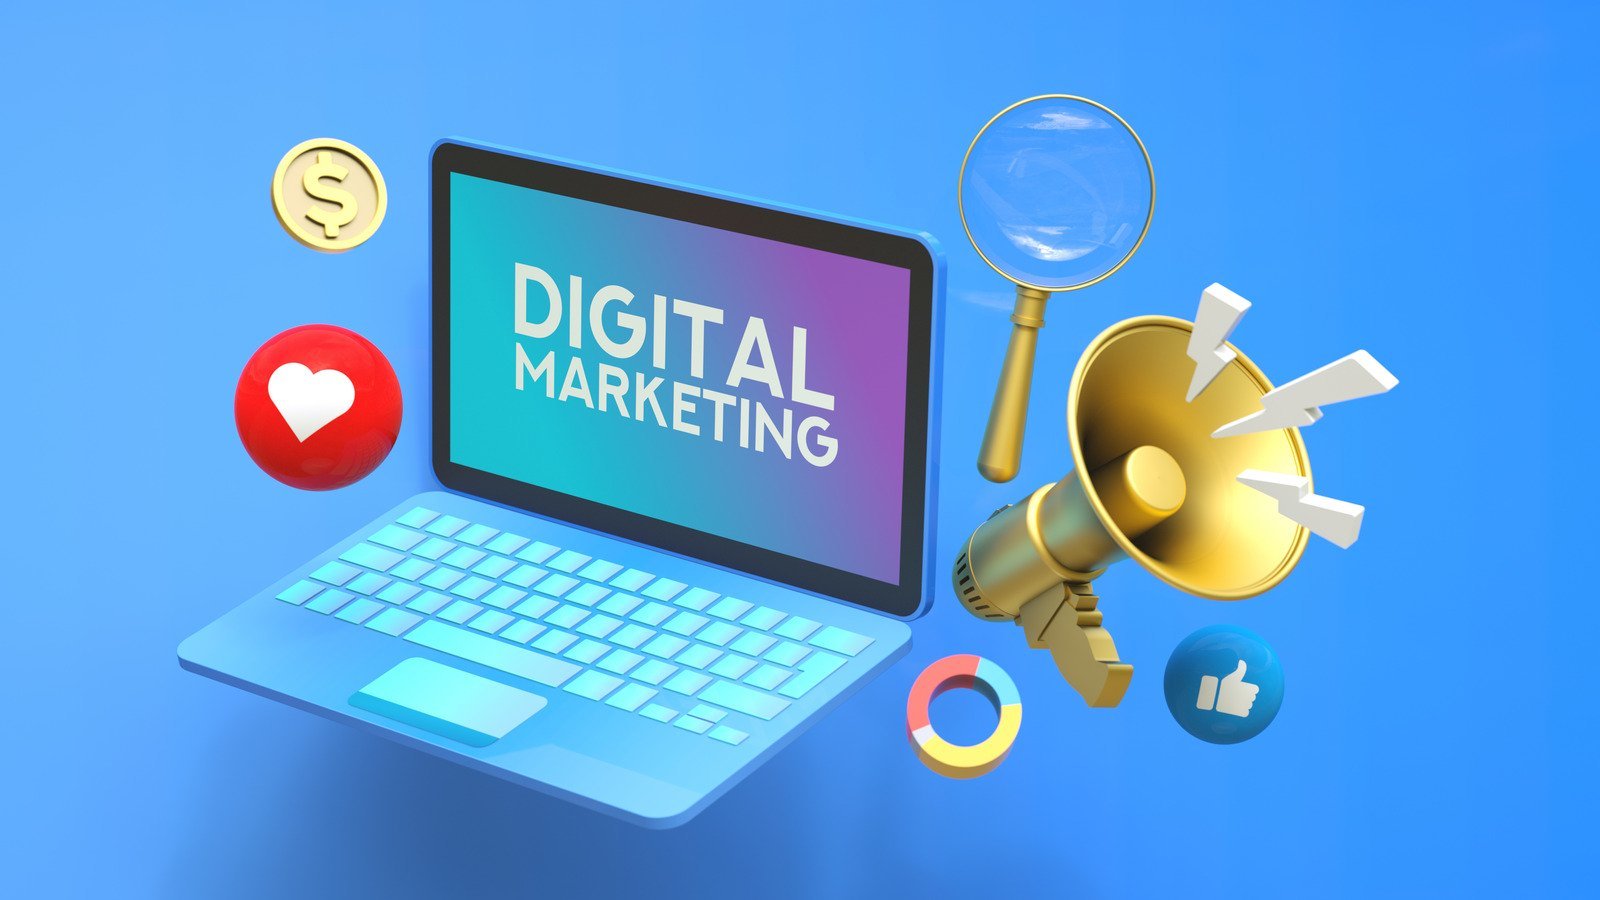 Level Up Your Skills with a Professional Certificate Programme in Digital Marketing